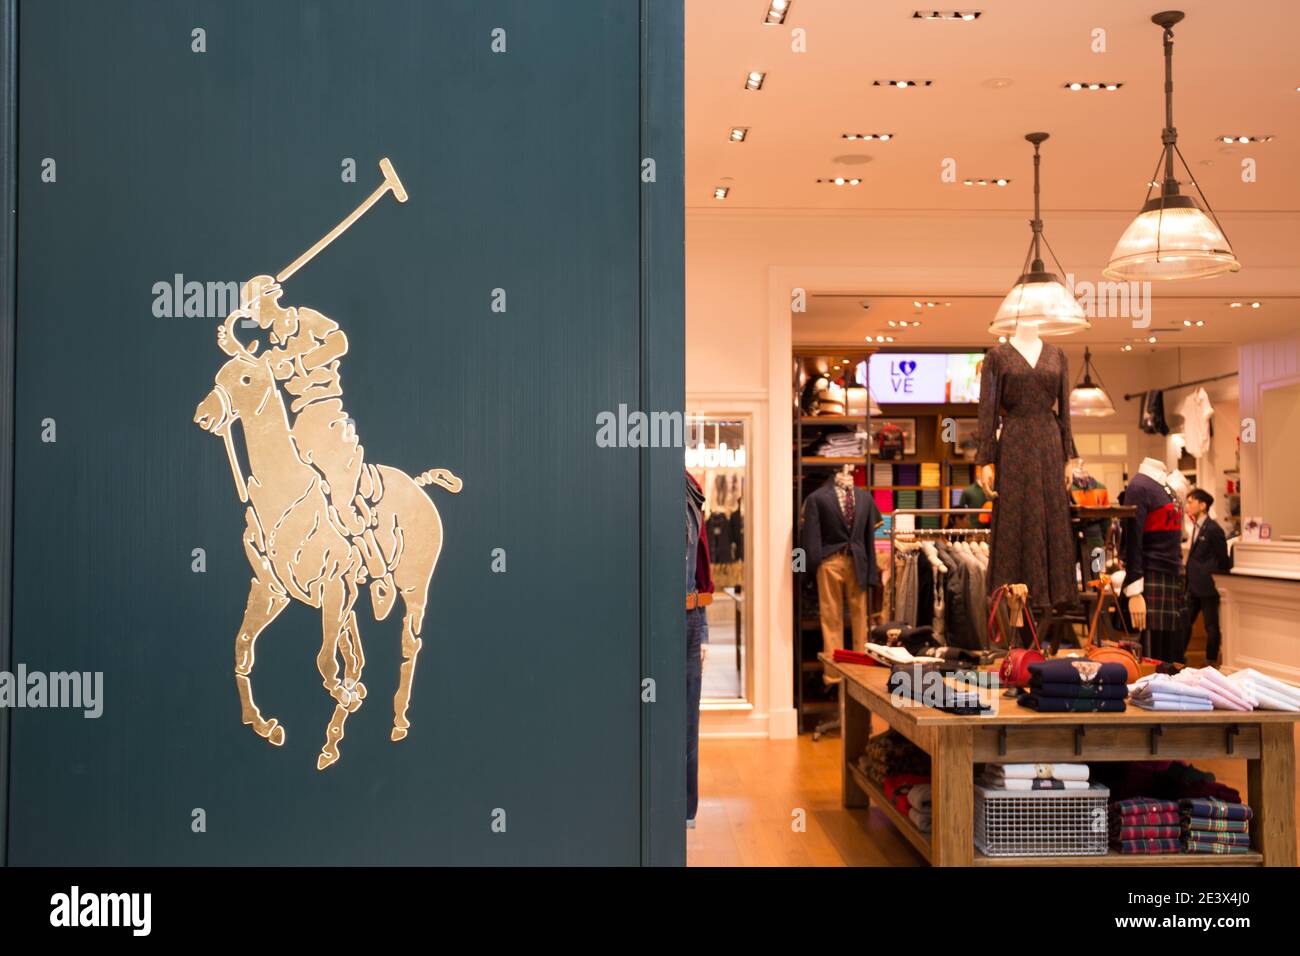 Singapore - October 26, 2019: Photograph of the Polo Ralph Lauren logo  outside a shop in Singapore Stock Photo - Alamy